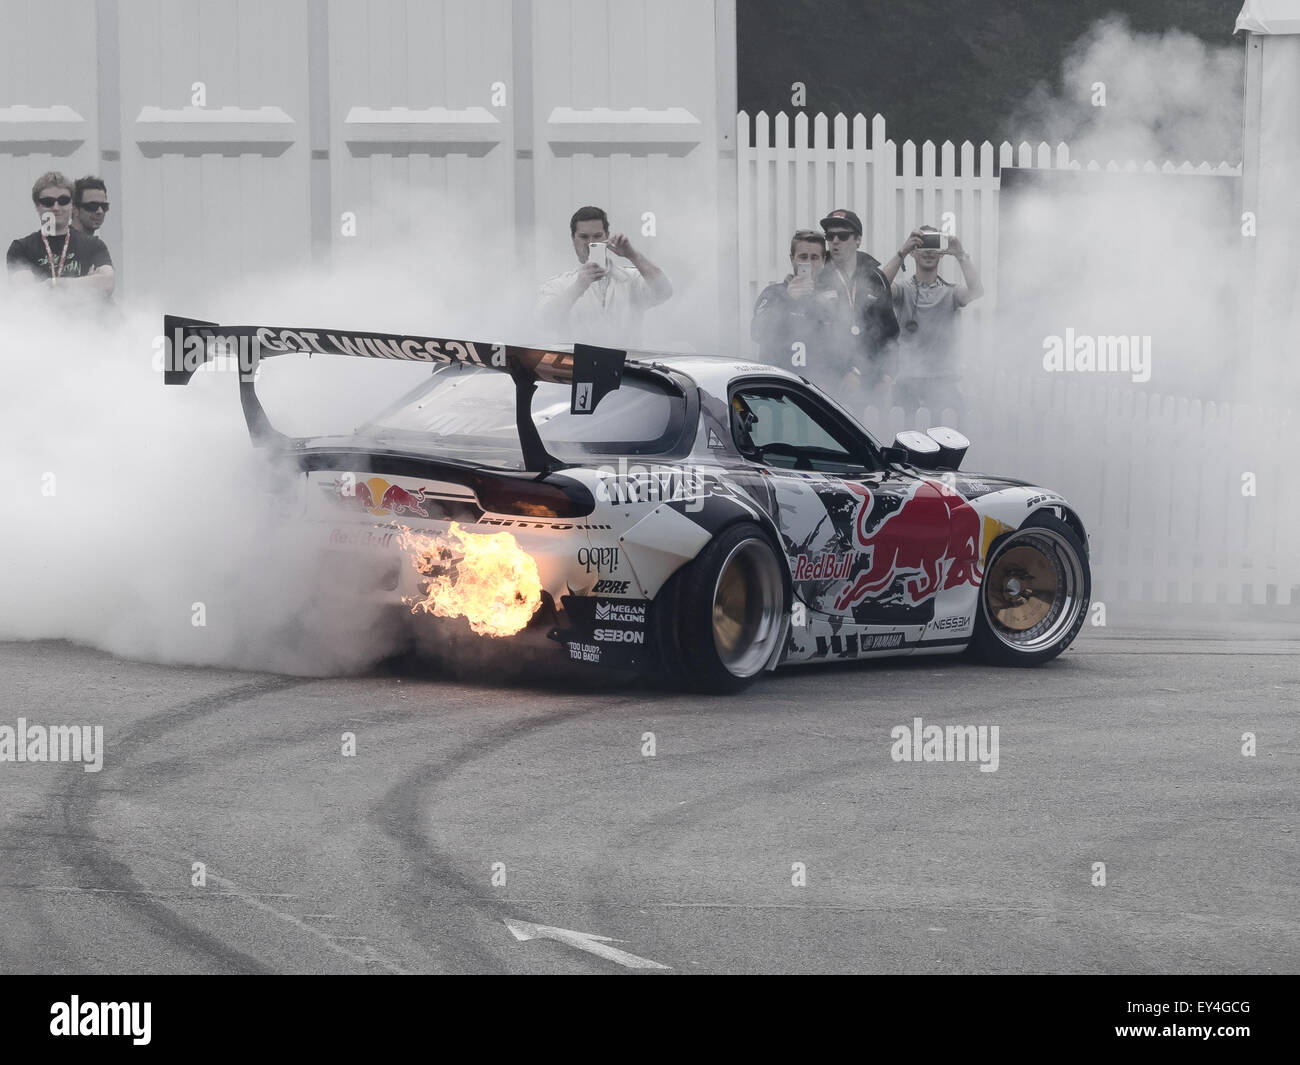 Goodwood, UK -26th June 2015: Red Bull Mazda FD RX7 Performing 'donut' at  the Goodwood Festival of Speed Stock Photo - Alamy